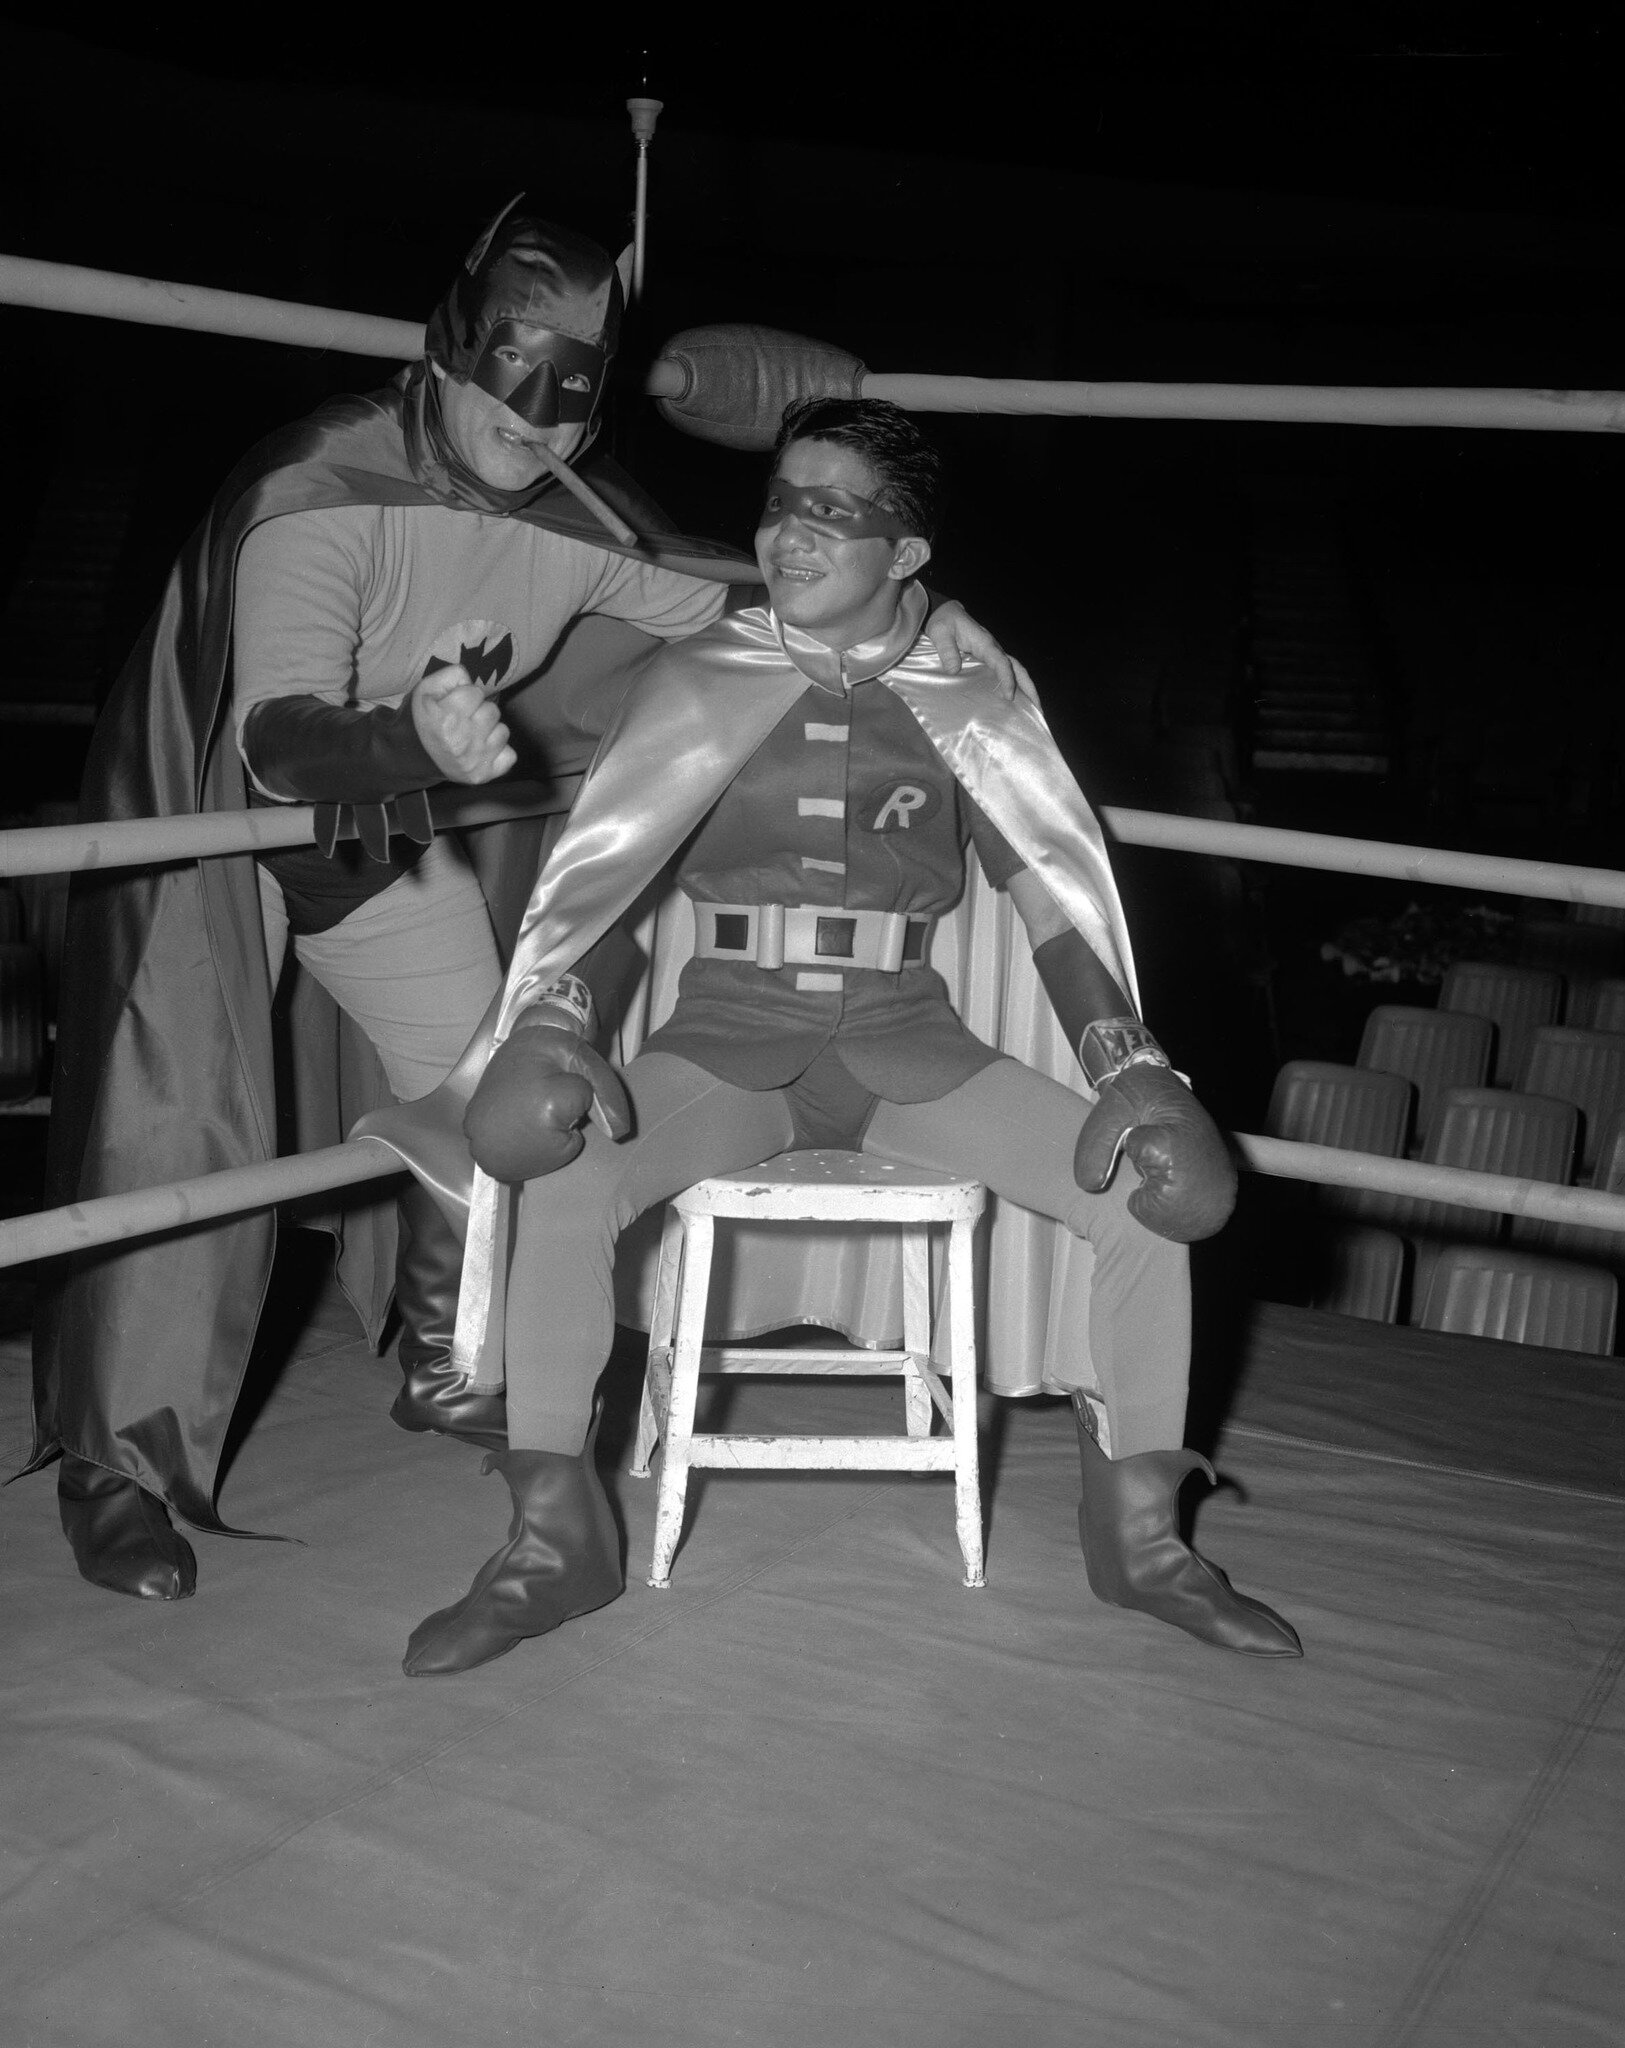 Holy Smokes Batman! Come to our Boxing Expo on April 14th at LA Plaza de Cultura y Artes and you'll see Olympic art and artifacts, hear great stories, and meet stars of L.A.'s historic boxing community. Confirmed attendees and participants include Da